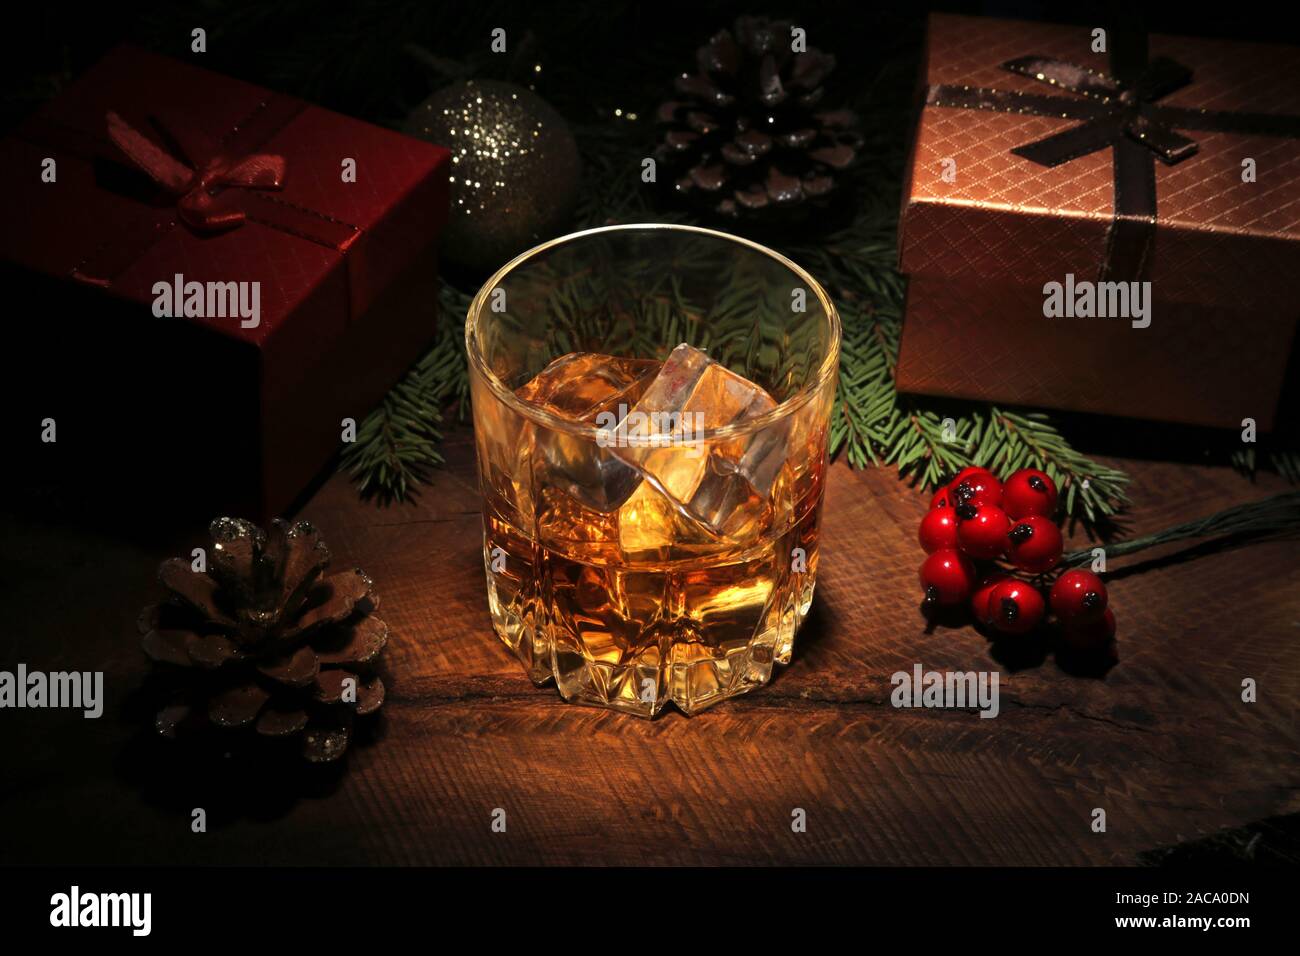 Glass with cognac or whiskey, Christmas balls and candles. New Year's tree, balls and glass with alcohol. Happy holidays decoration Stock Photo